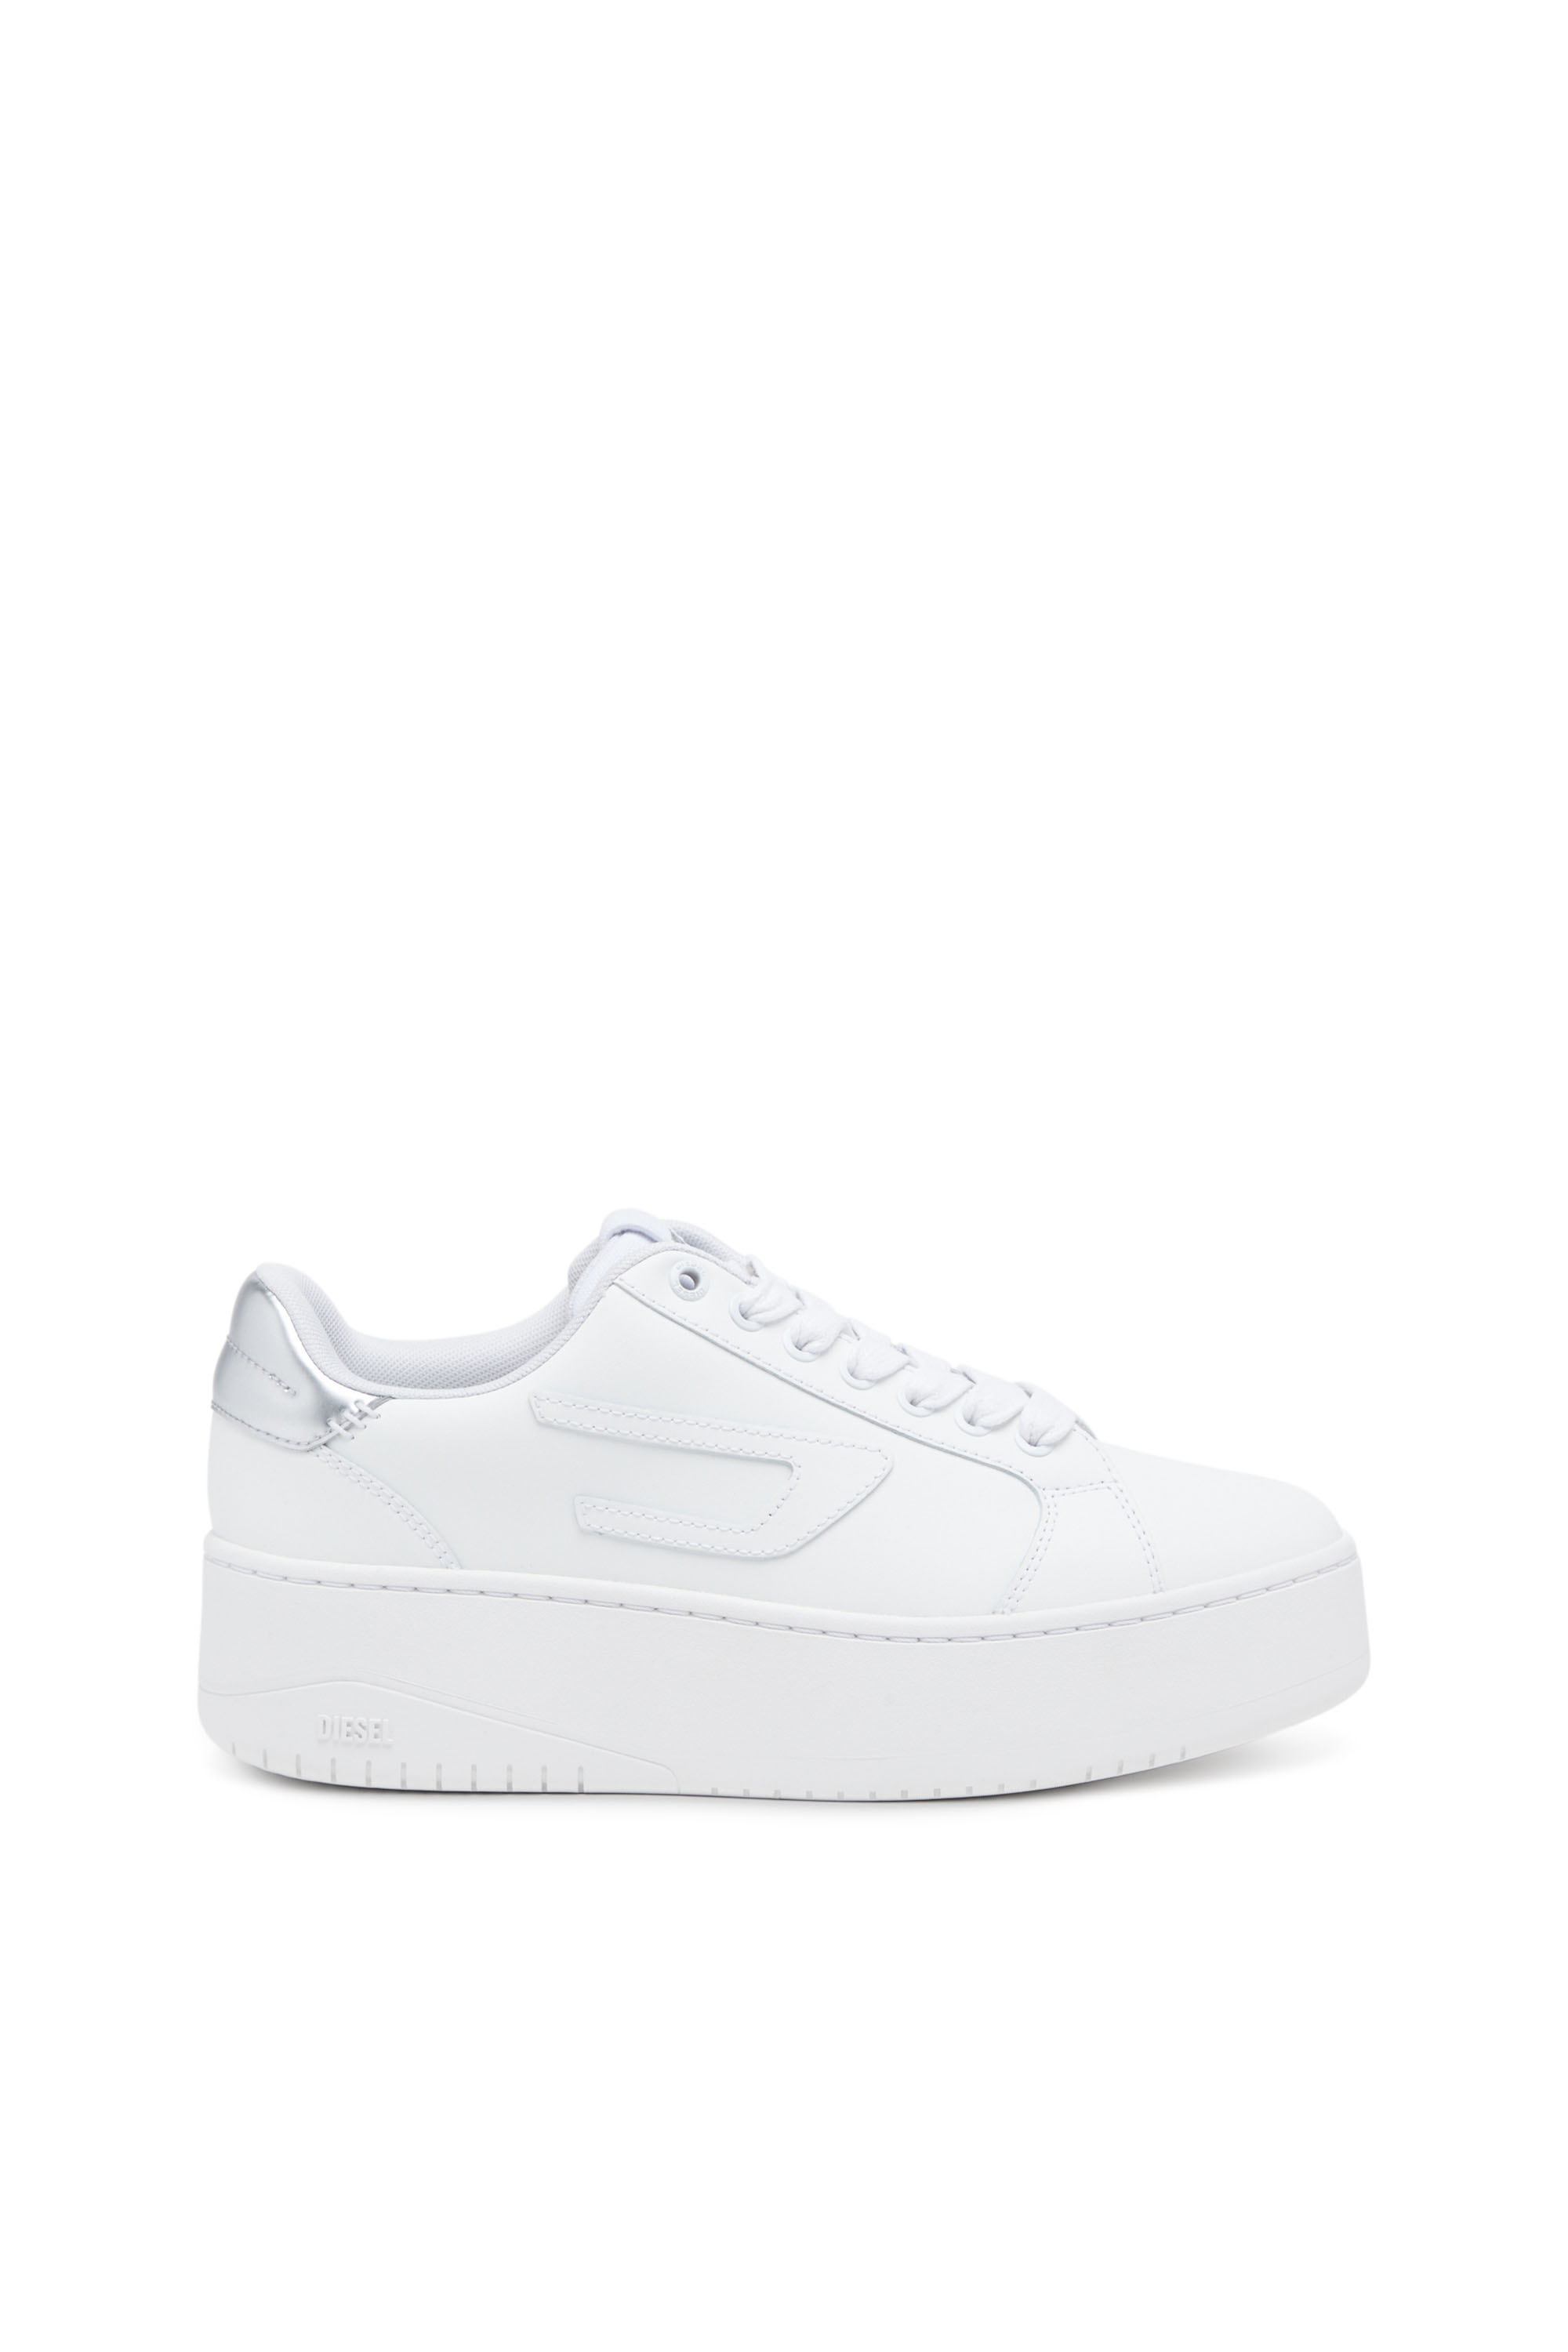 Diesel - S-Athene Bold W - Low-top sneakers with flatform sole - Sneakers - Woman - White